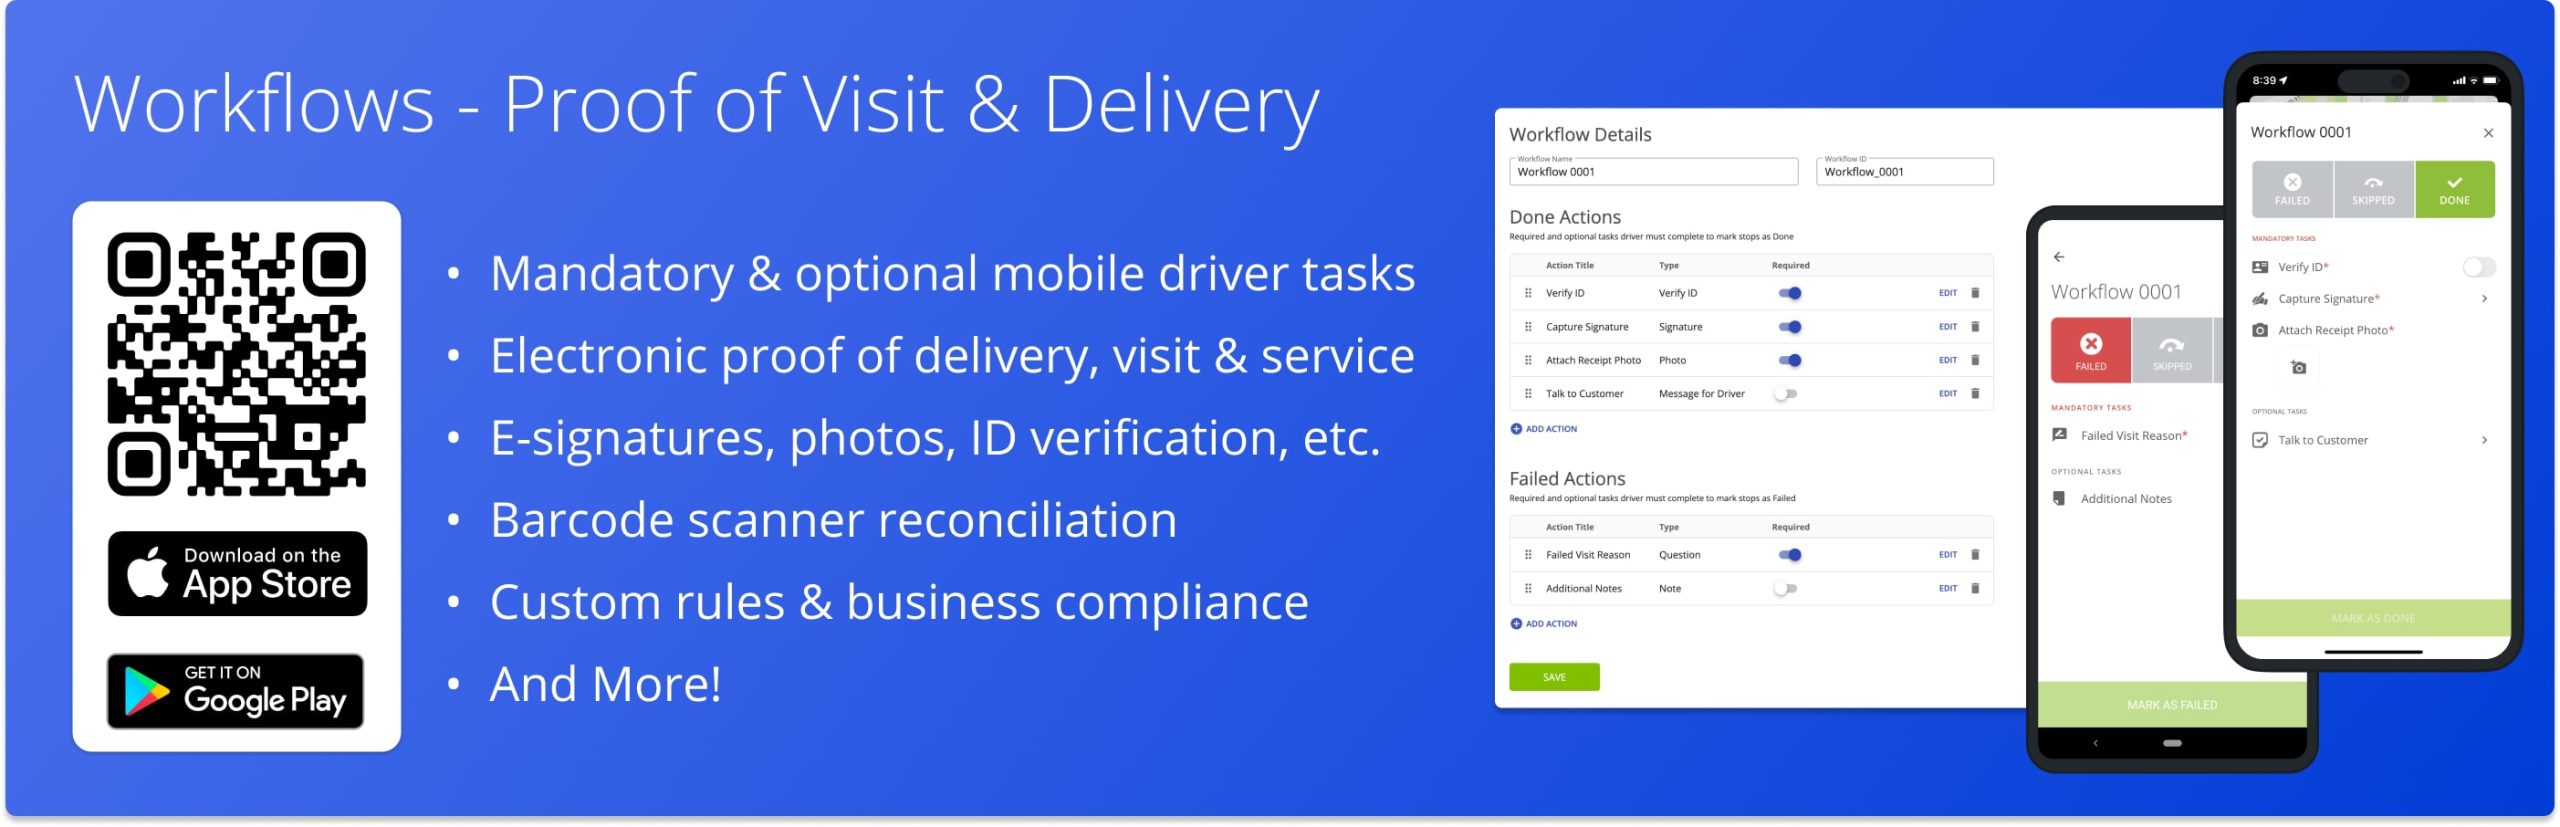 Route4Me Workflows: proof of delivery, visit, and service workflows with mandatory and optional mobile driver tasks.